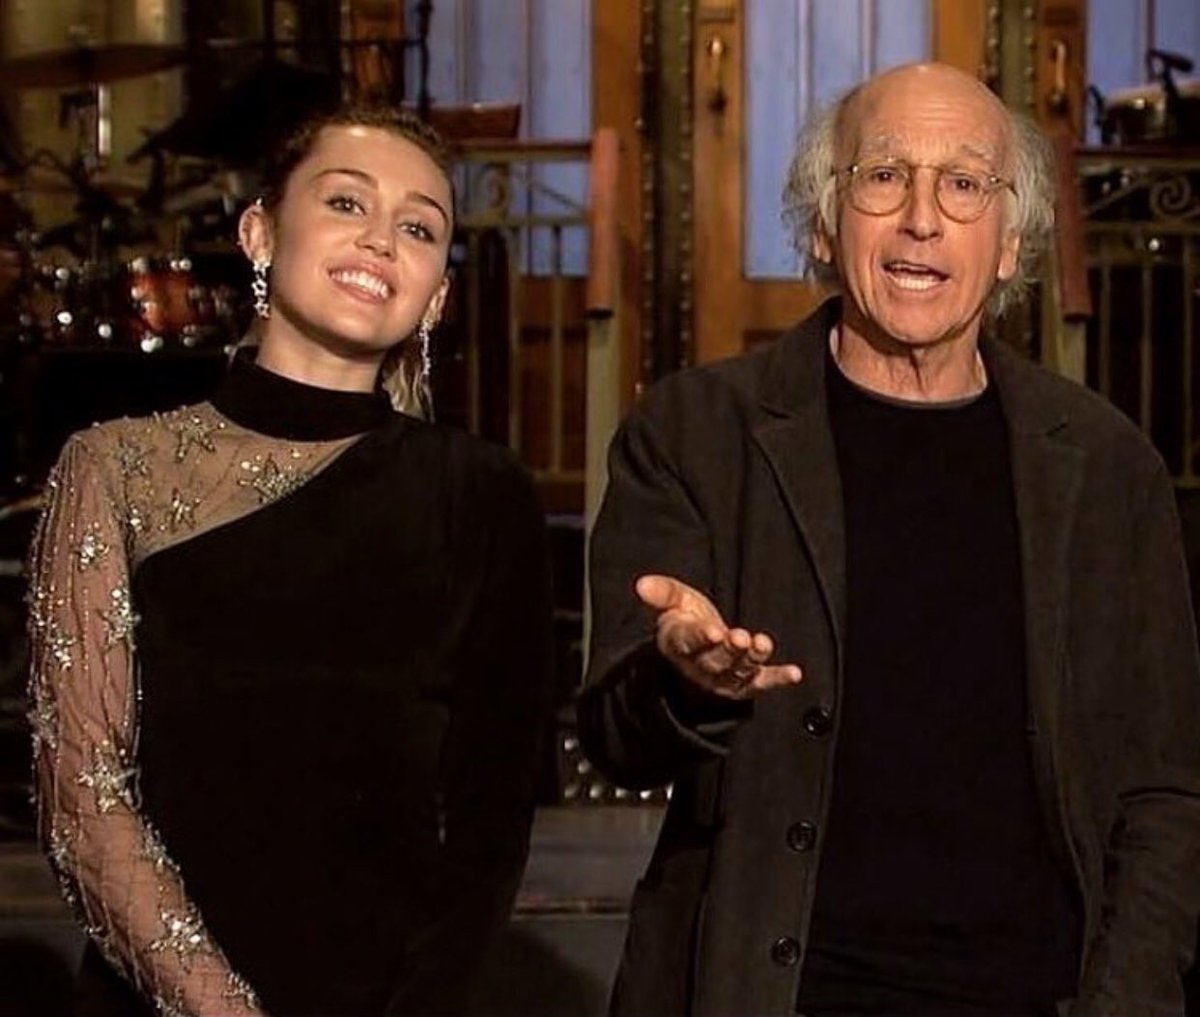 Don’t forget to watch @nbcsnl tomorrow! Larry David is hosting & I am the musical guest! https://t.co/ocN5aX8HTP